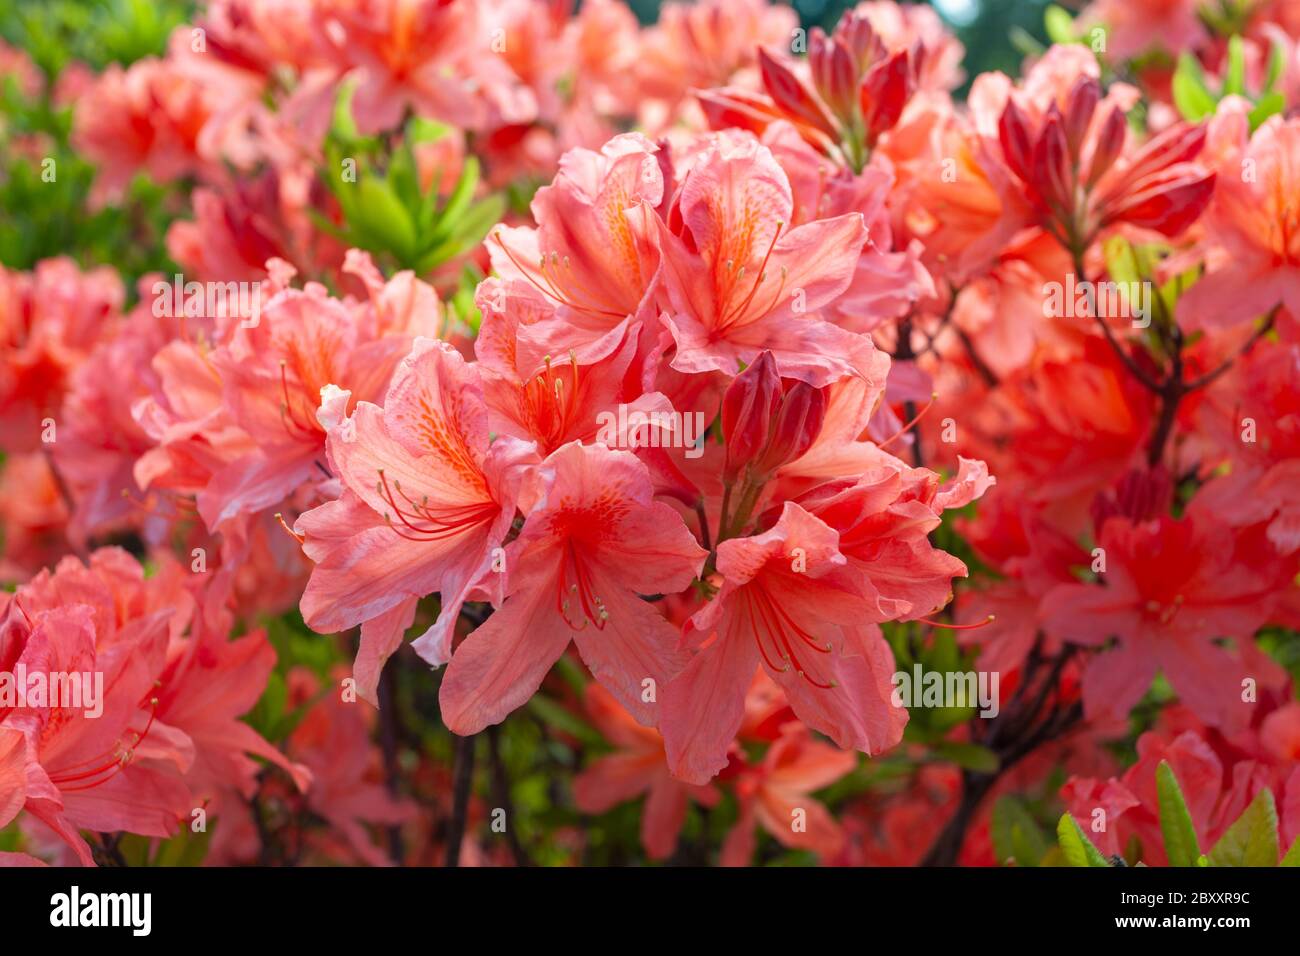 Pink rhododendrons close-up, flowering trees. Stock Photo